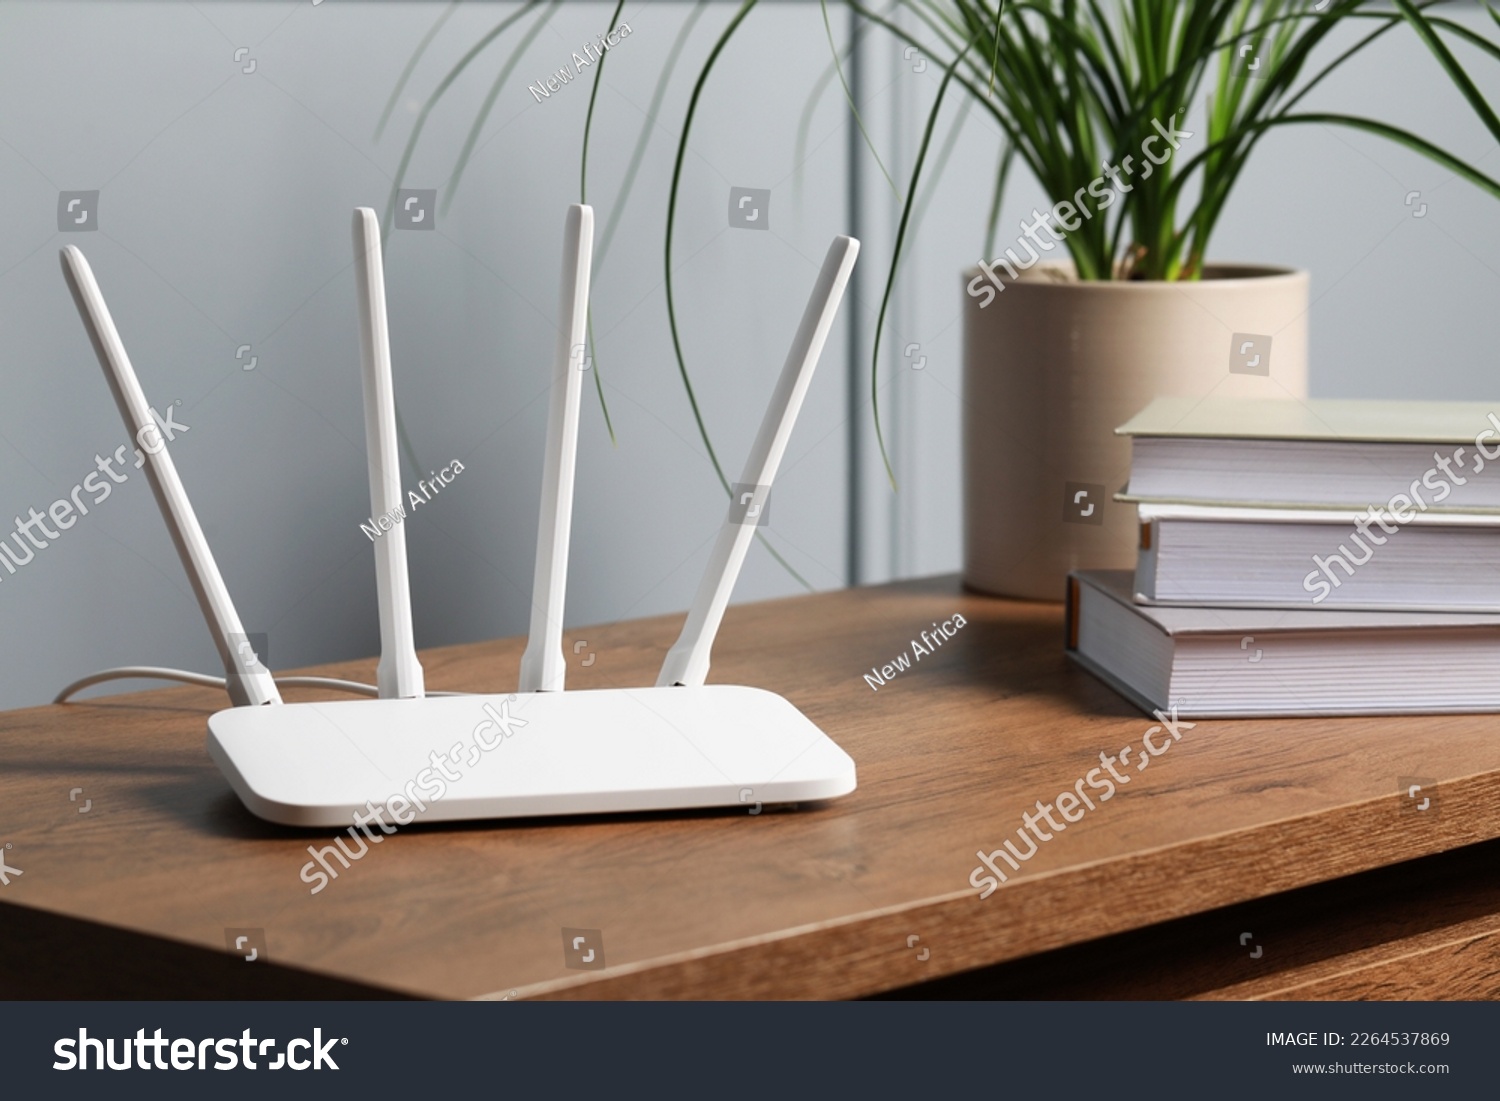 New white Wi-Fi router on wooden table indoors #2264537869